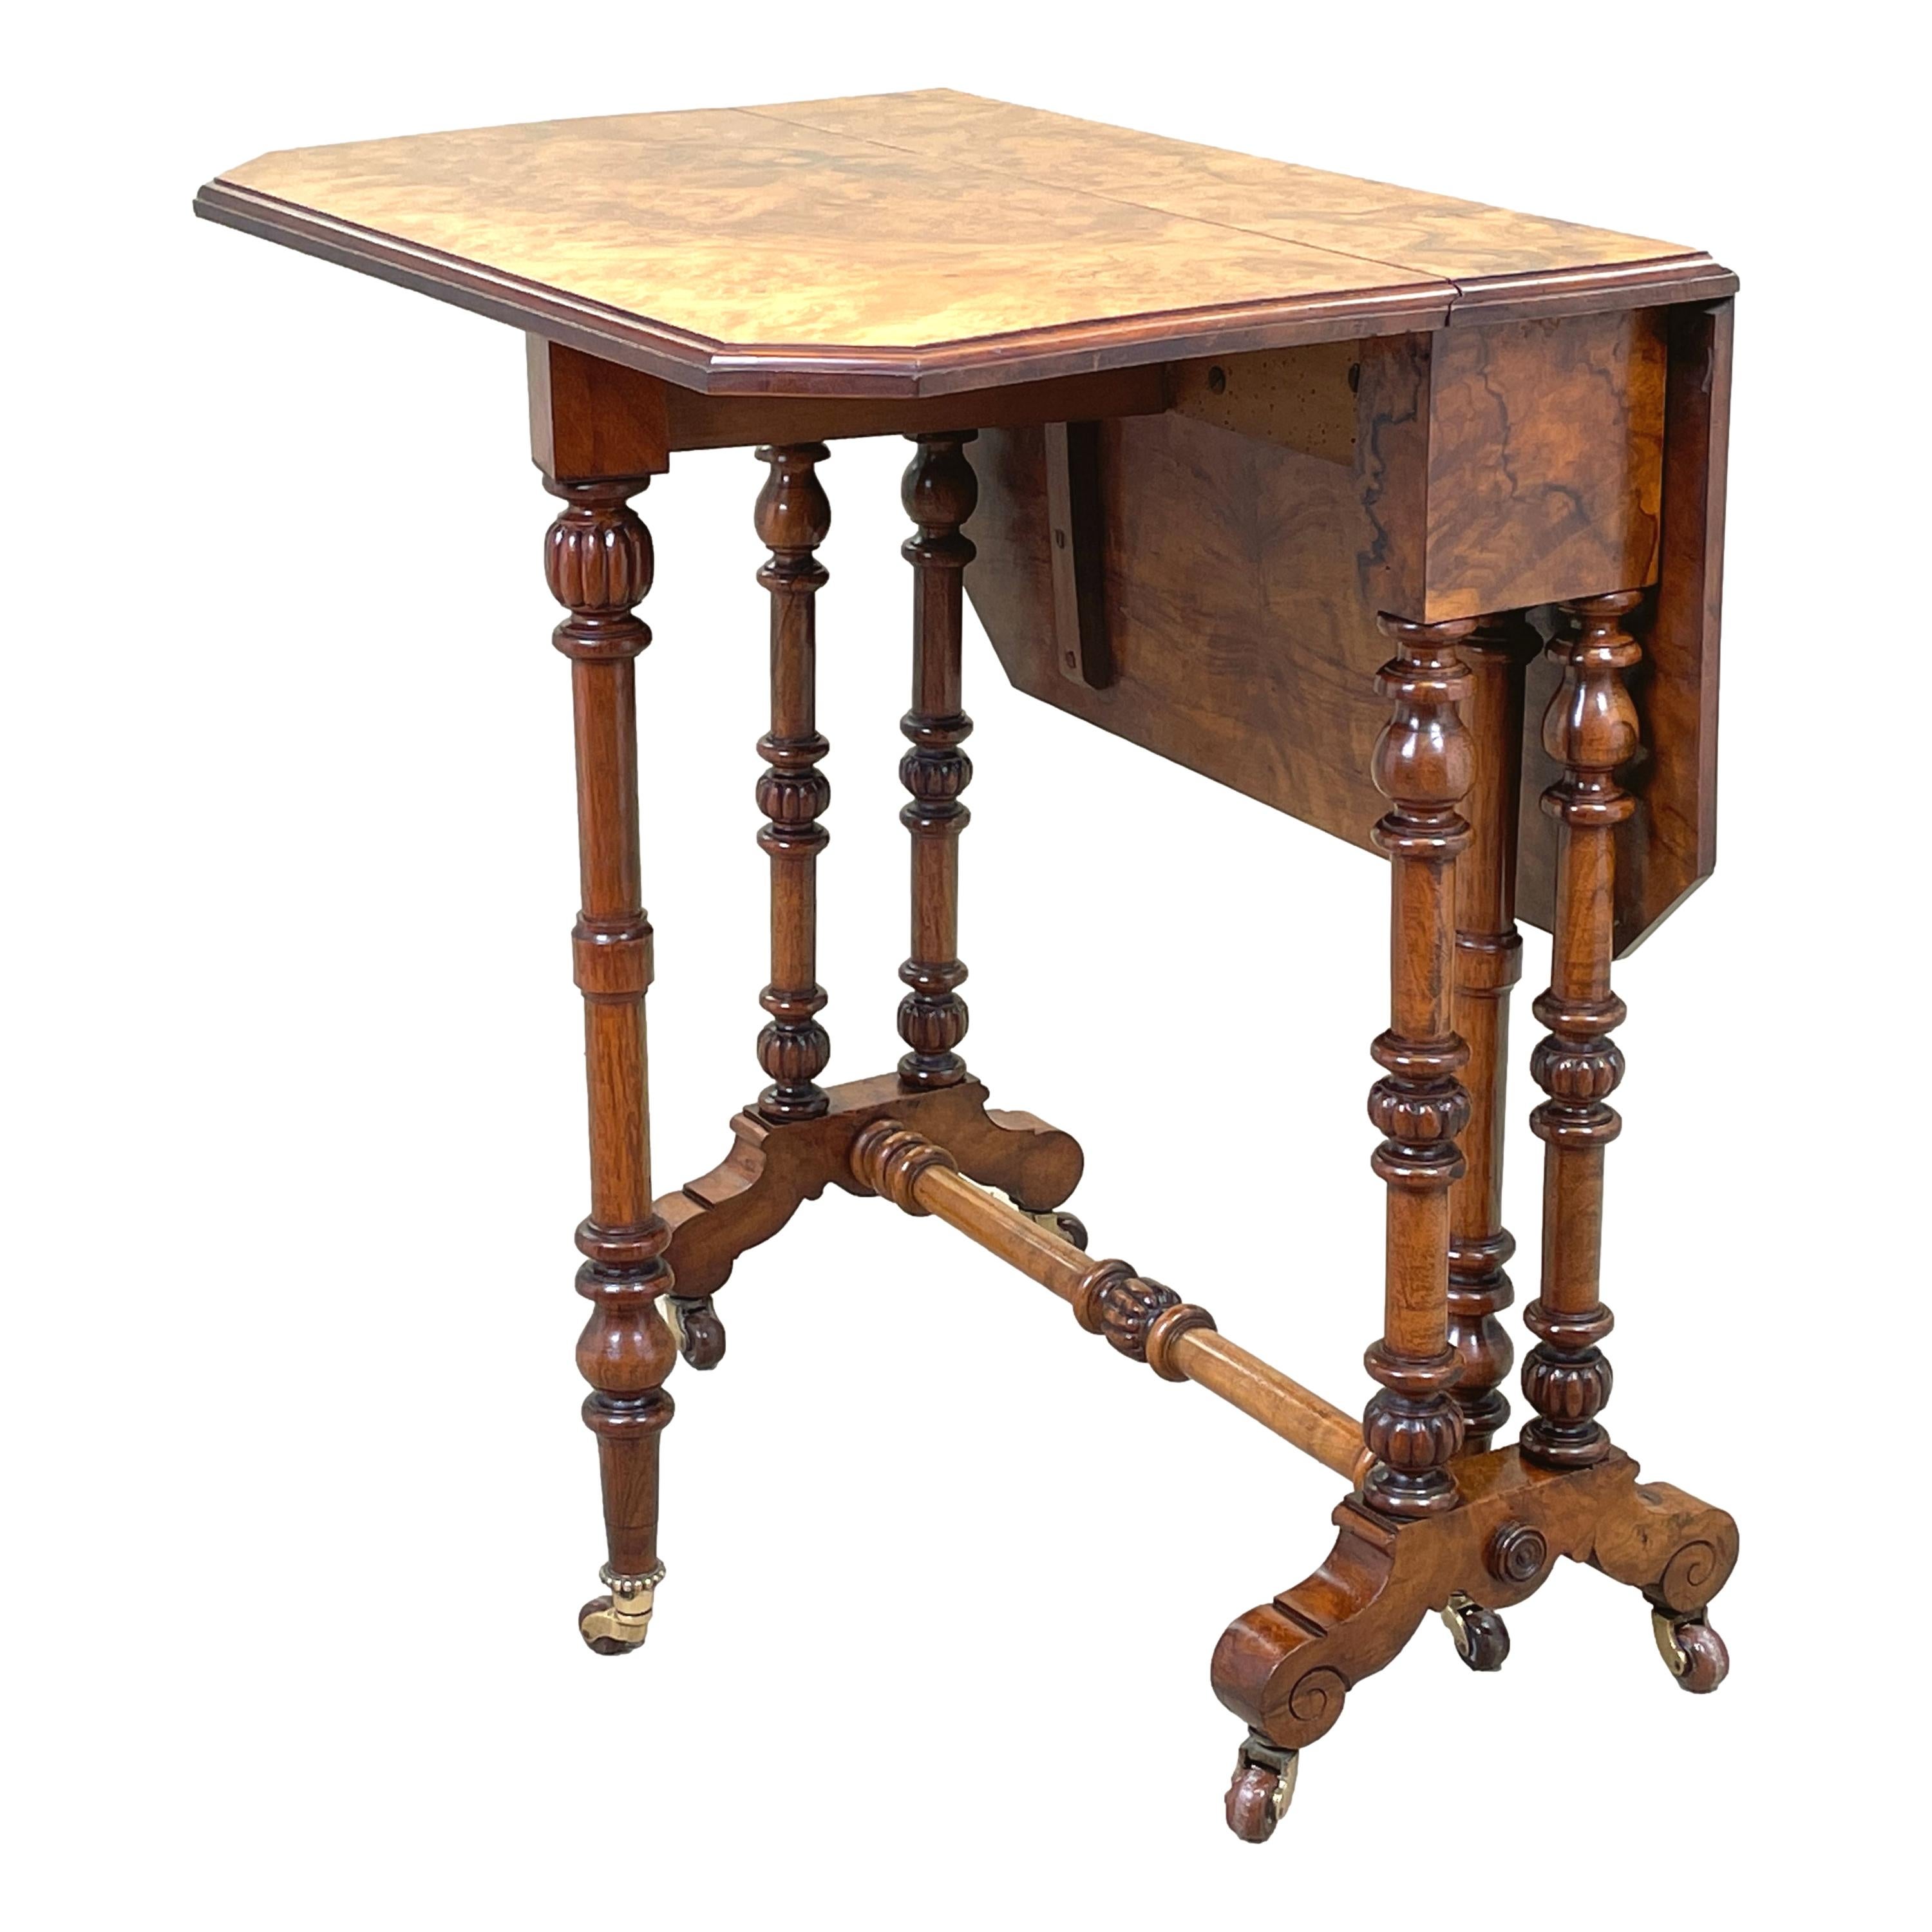 A very good quality 19th century Victorian burr walnut
Sutherland table having superbly figured two drop flap
top raised on elegant turned & carved upright supports
terminating with original brass castors

(The term “Sutherland Table” is